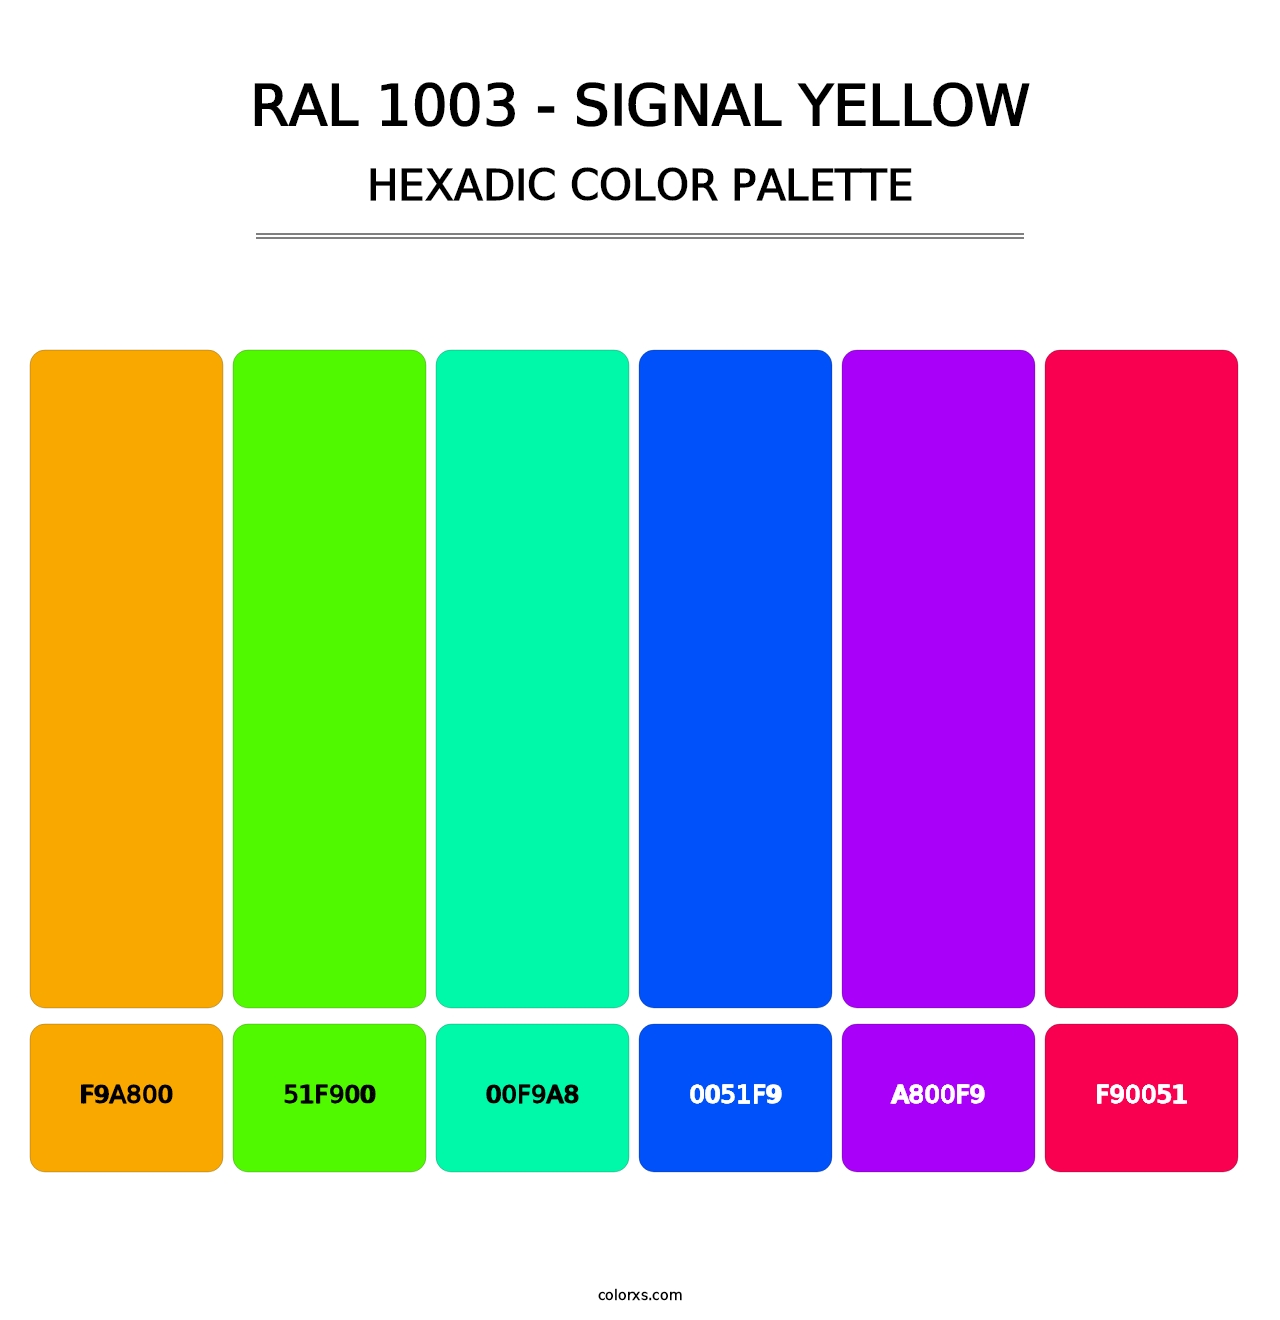 RAL 1003 - Signal Yellow - Hexadic Color Palette